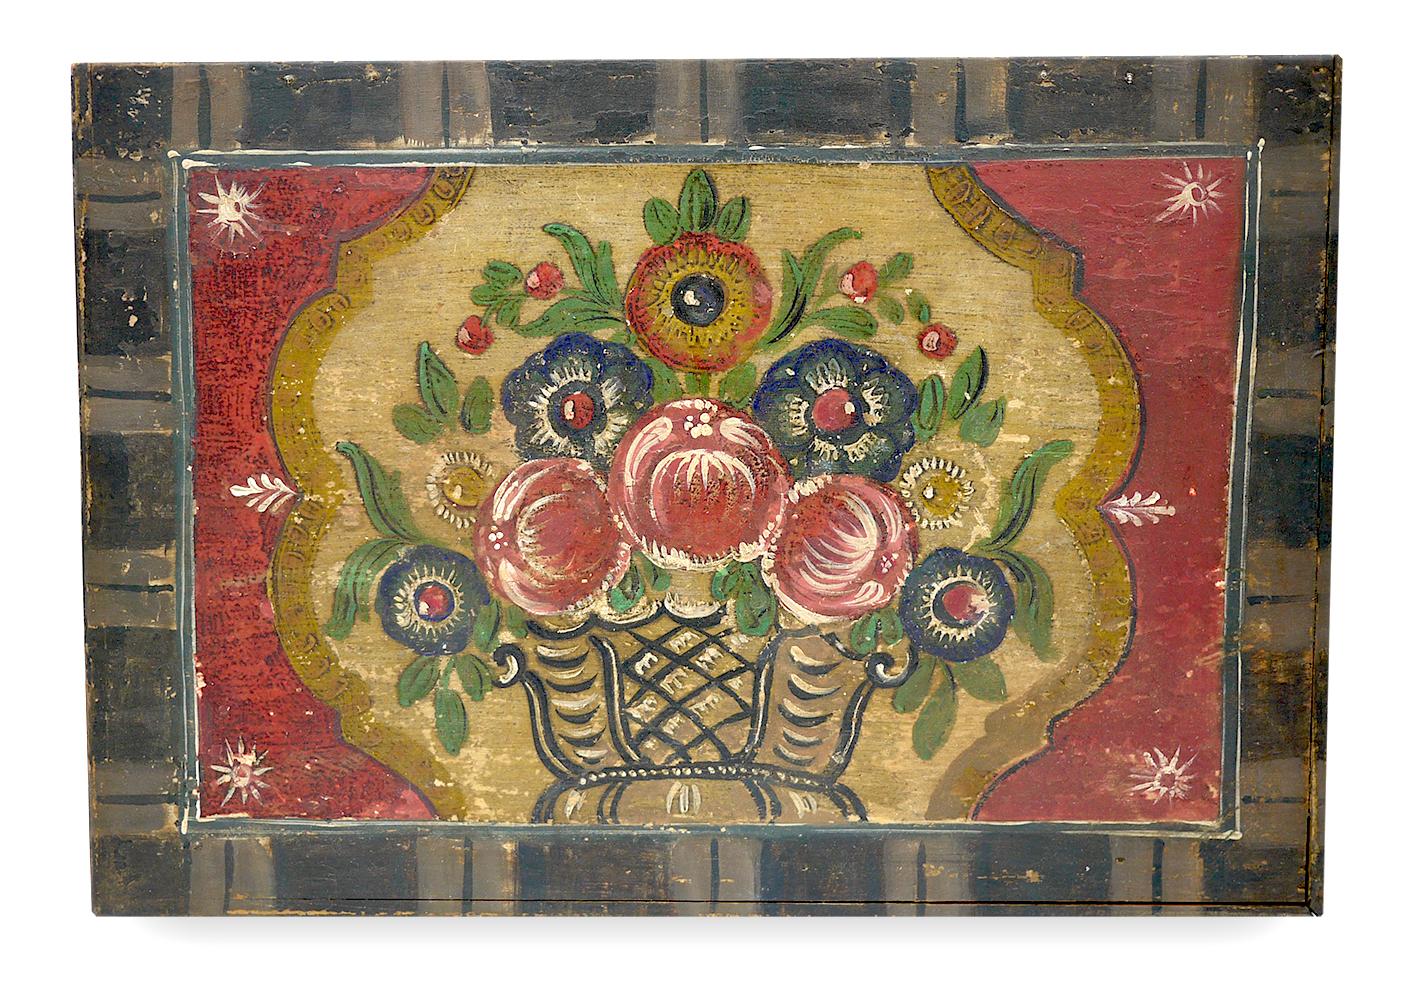 Italian Painted Wooden Box, Early 20th Century